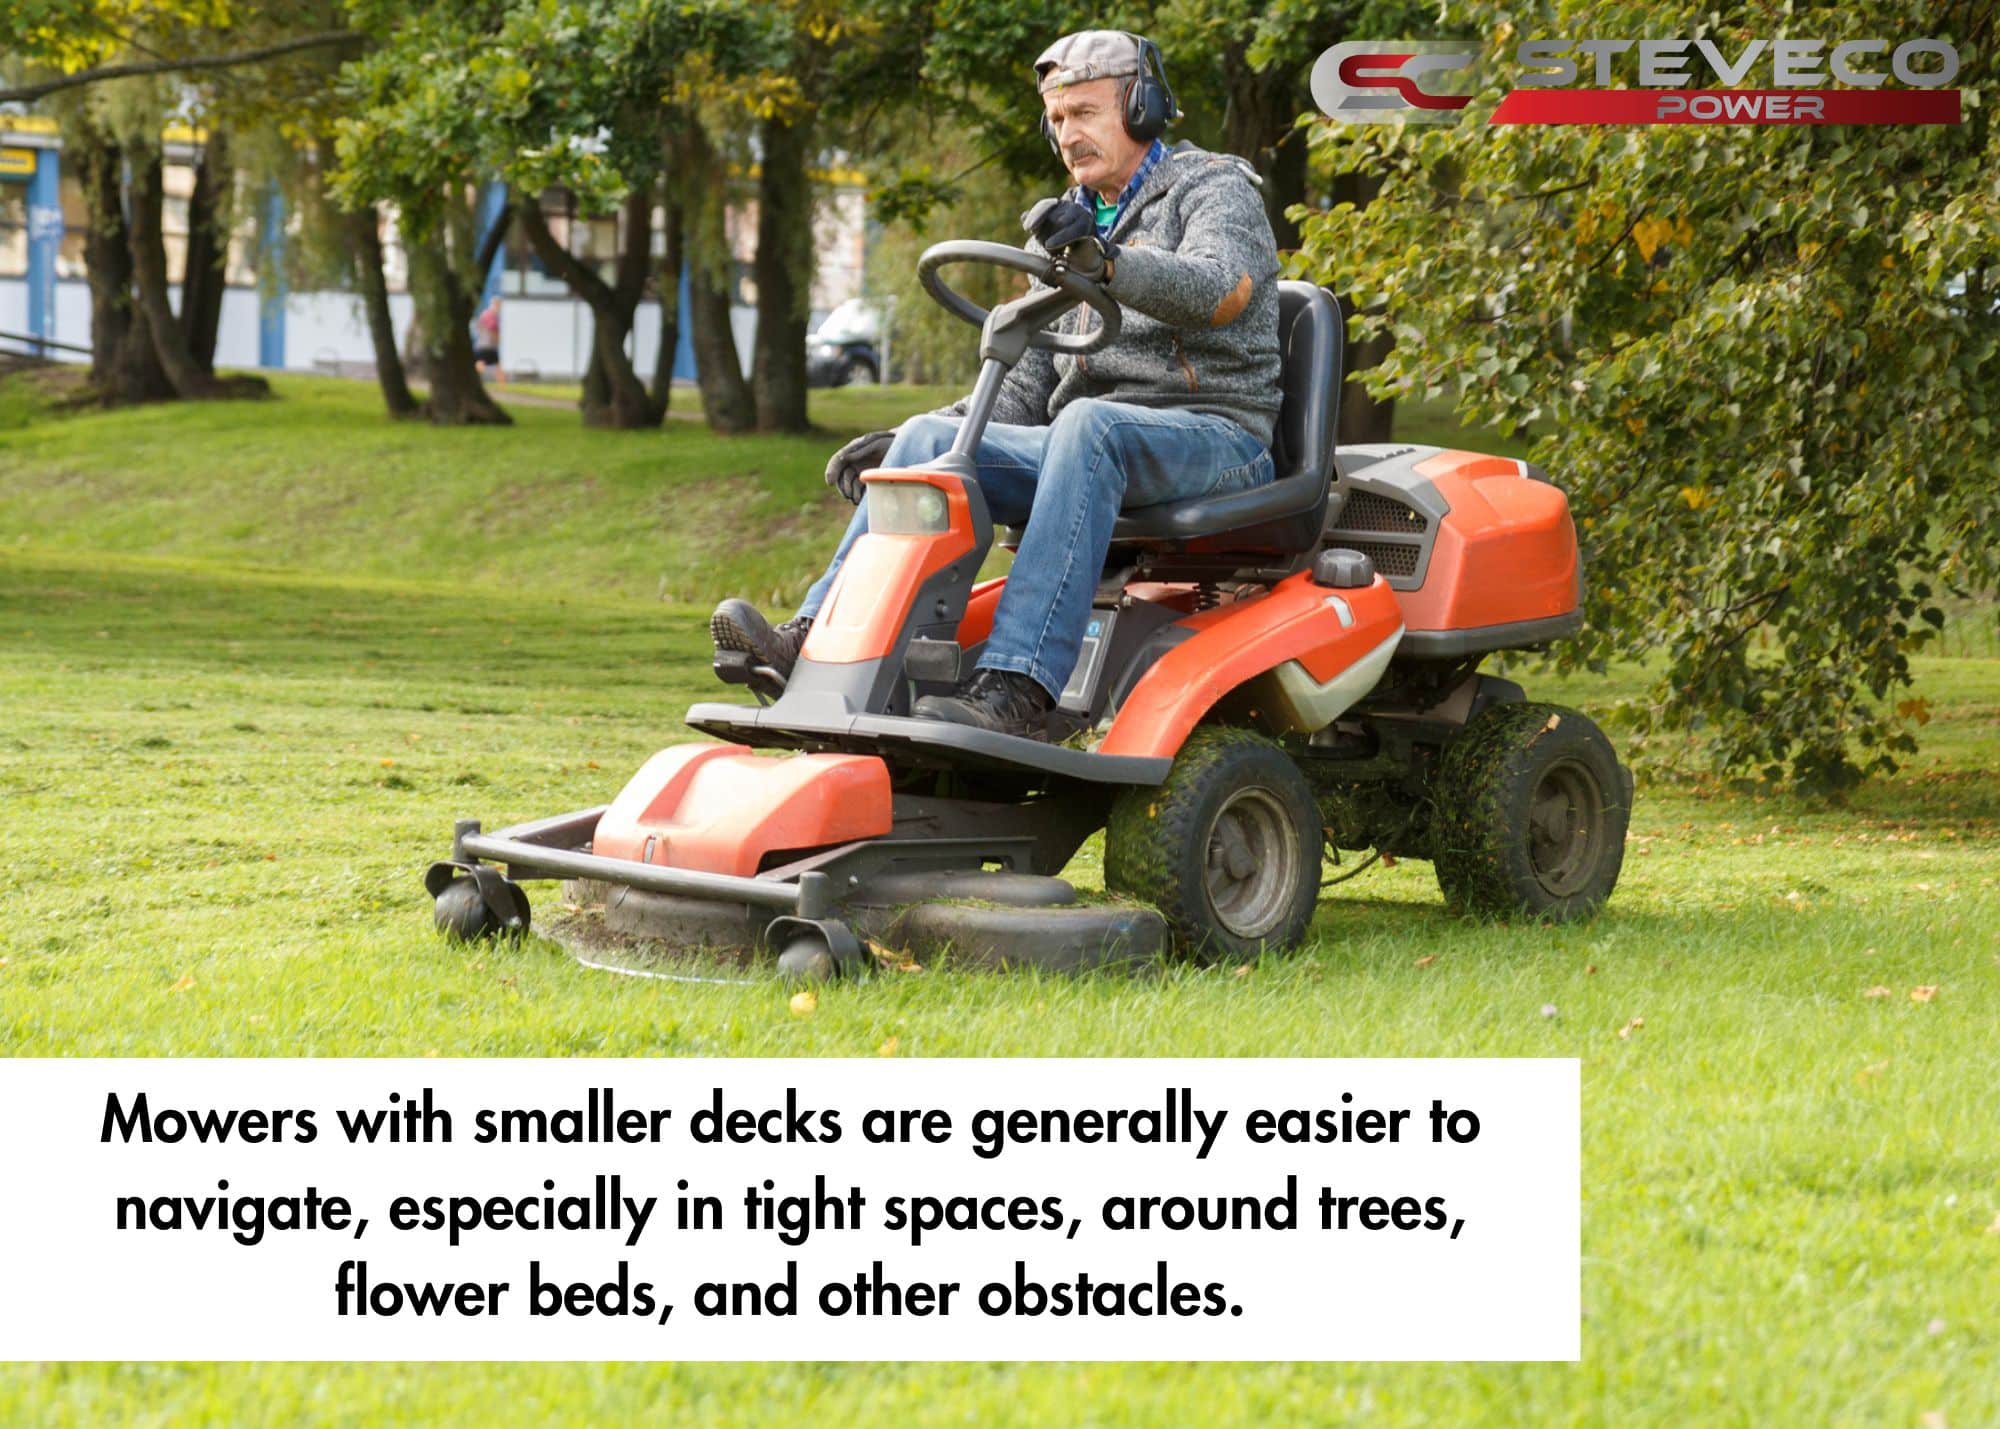 mowers with smaller decks